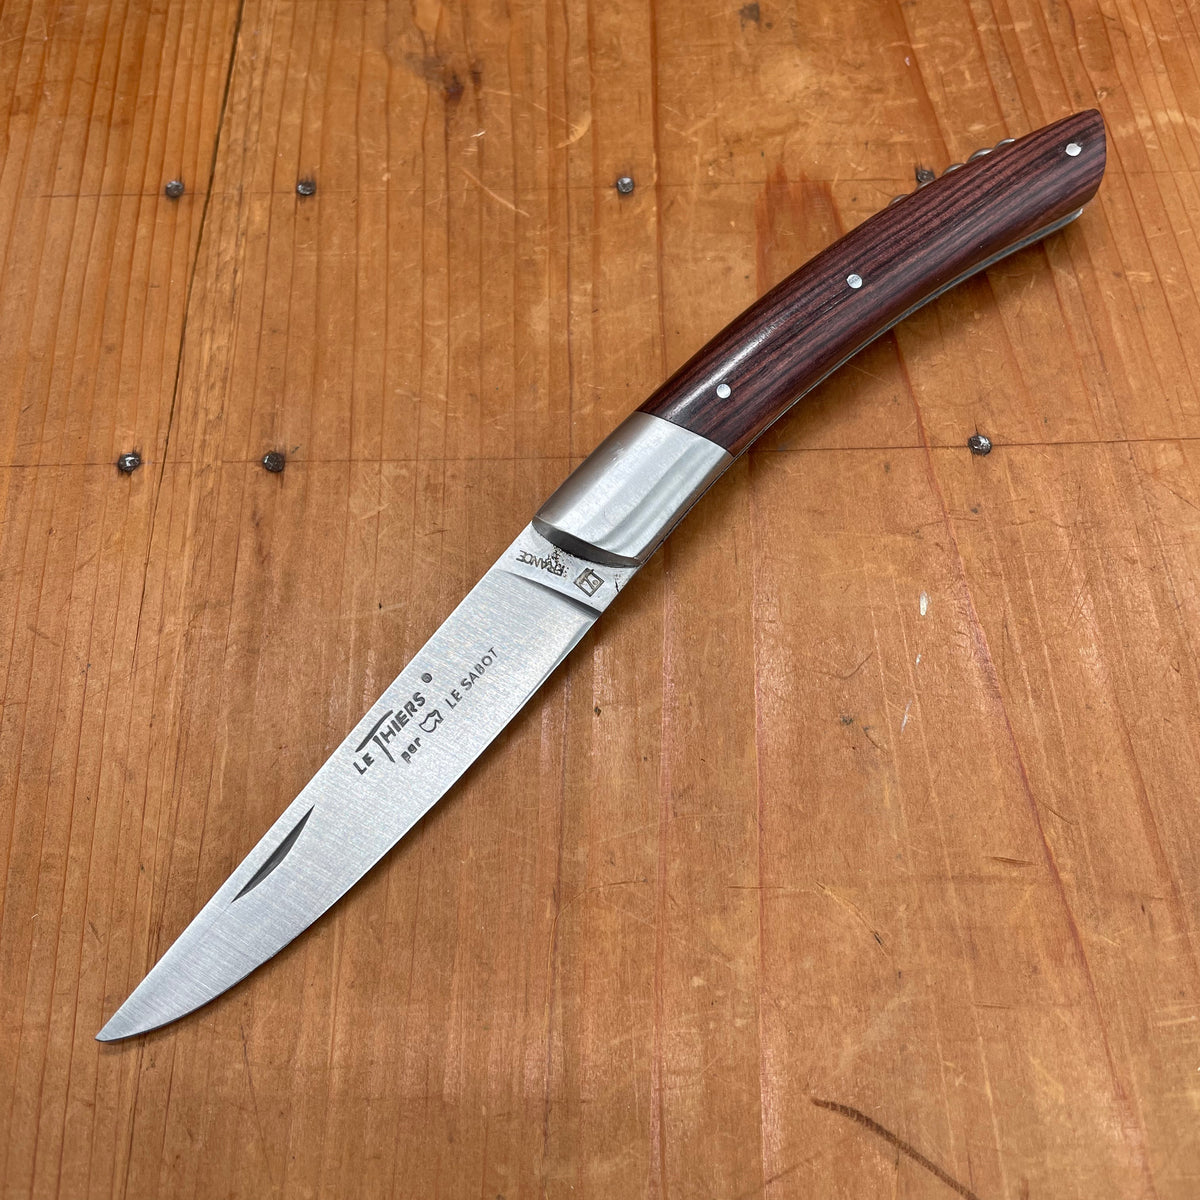 Au Sabot Le Thiers 12cm Pocket Knife Stainless Bolstered Violet Handle with Corkscrew